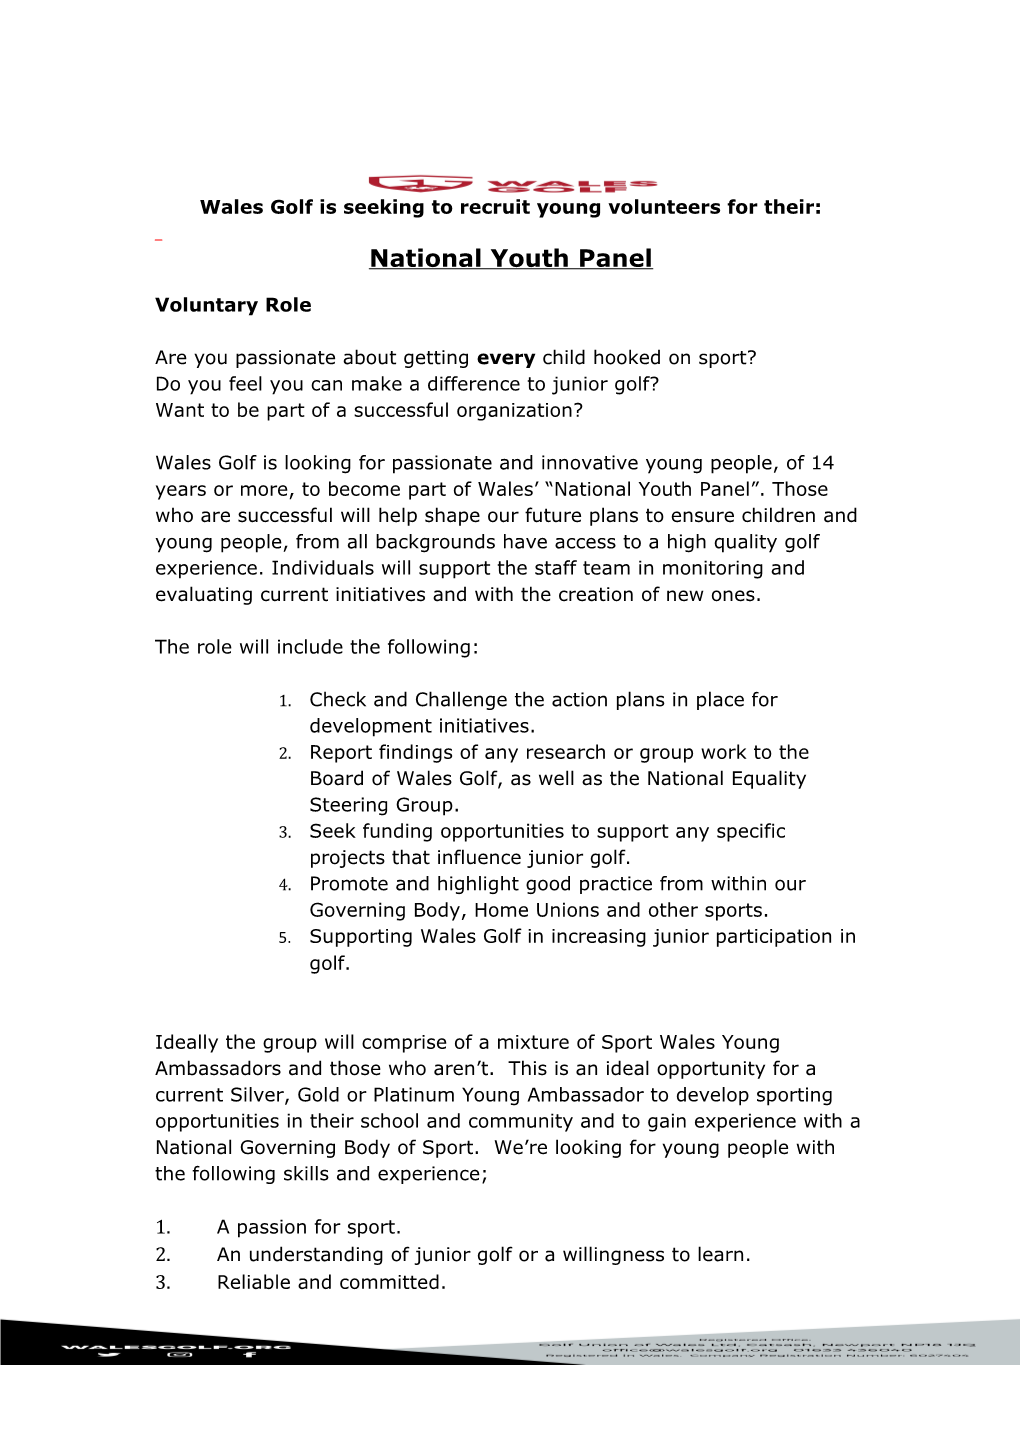 Wales Golf Is Seeking to Recruit Young Volunteers for Their